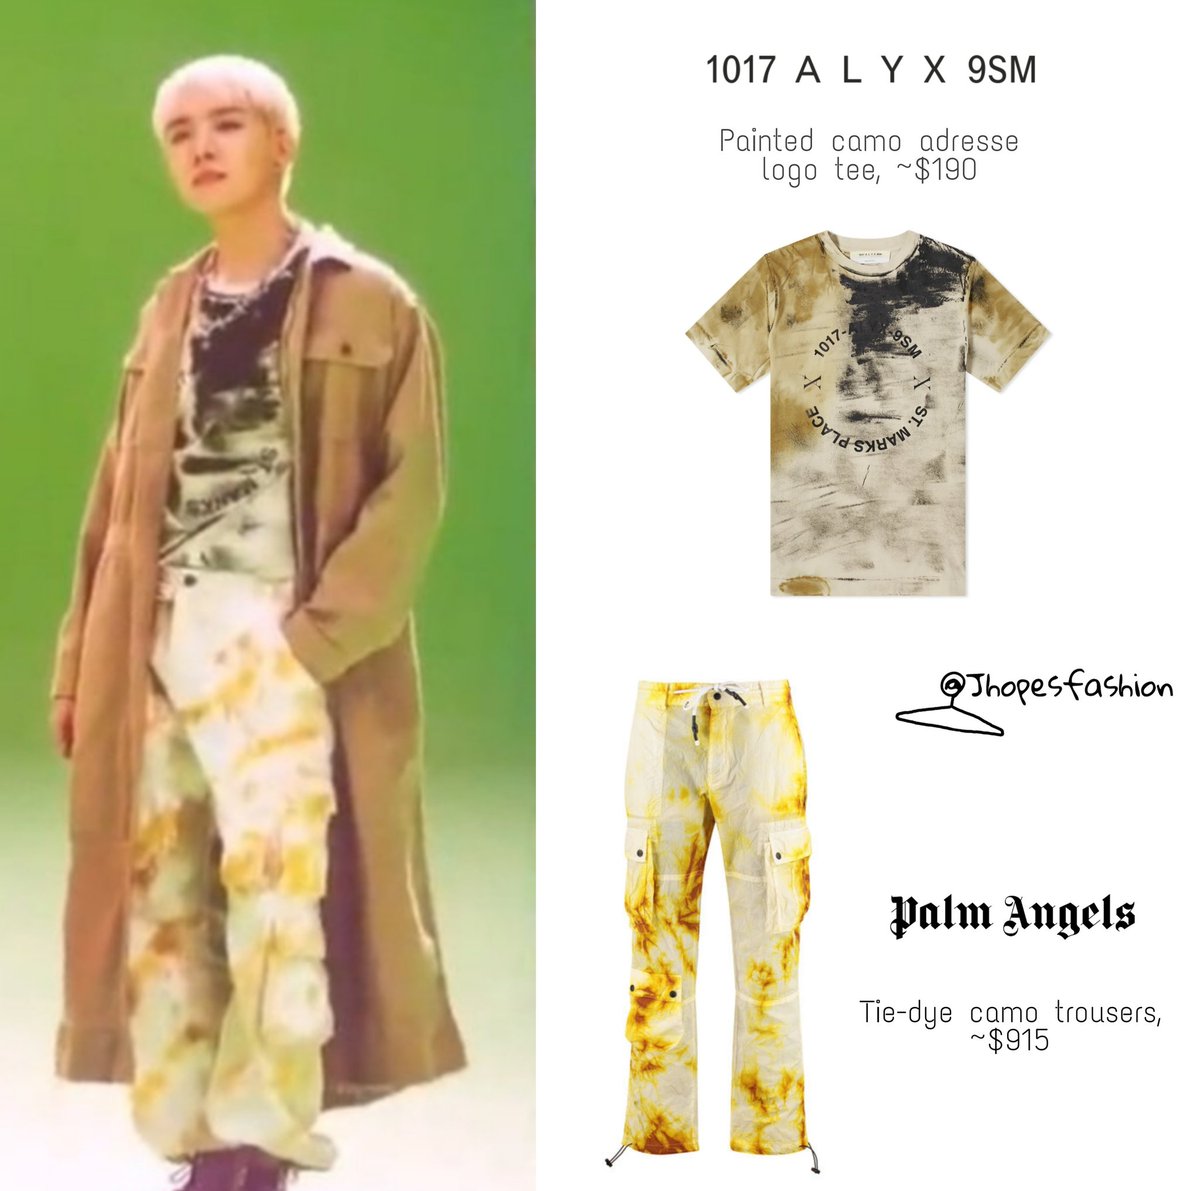 BTS J-hope wore a vibrant camouflage outfit that is fun and eye